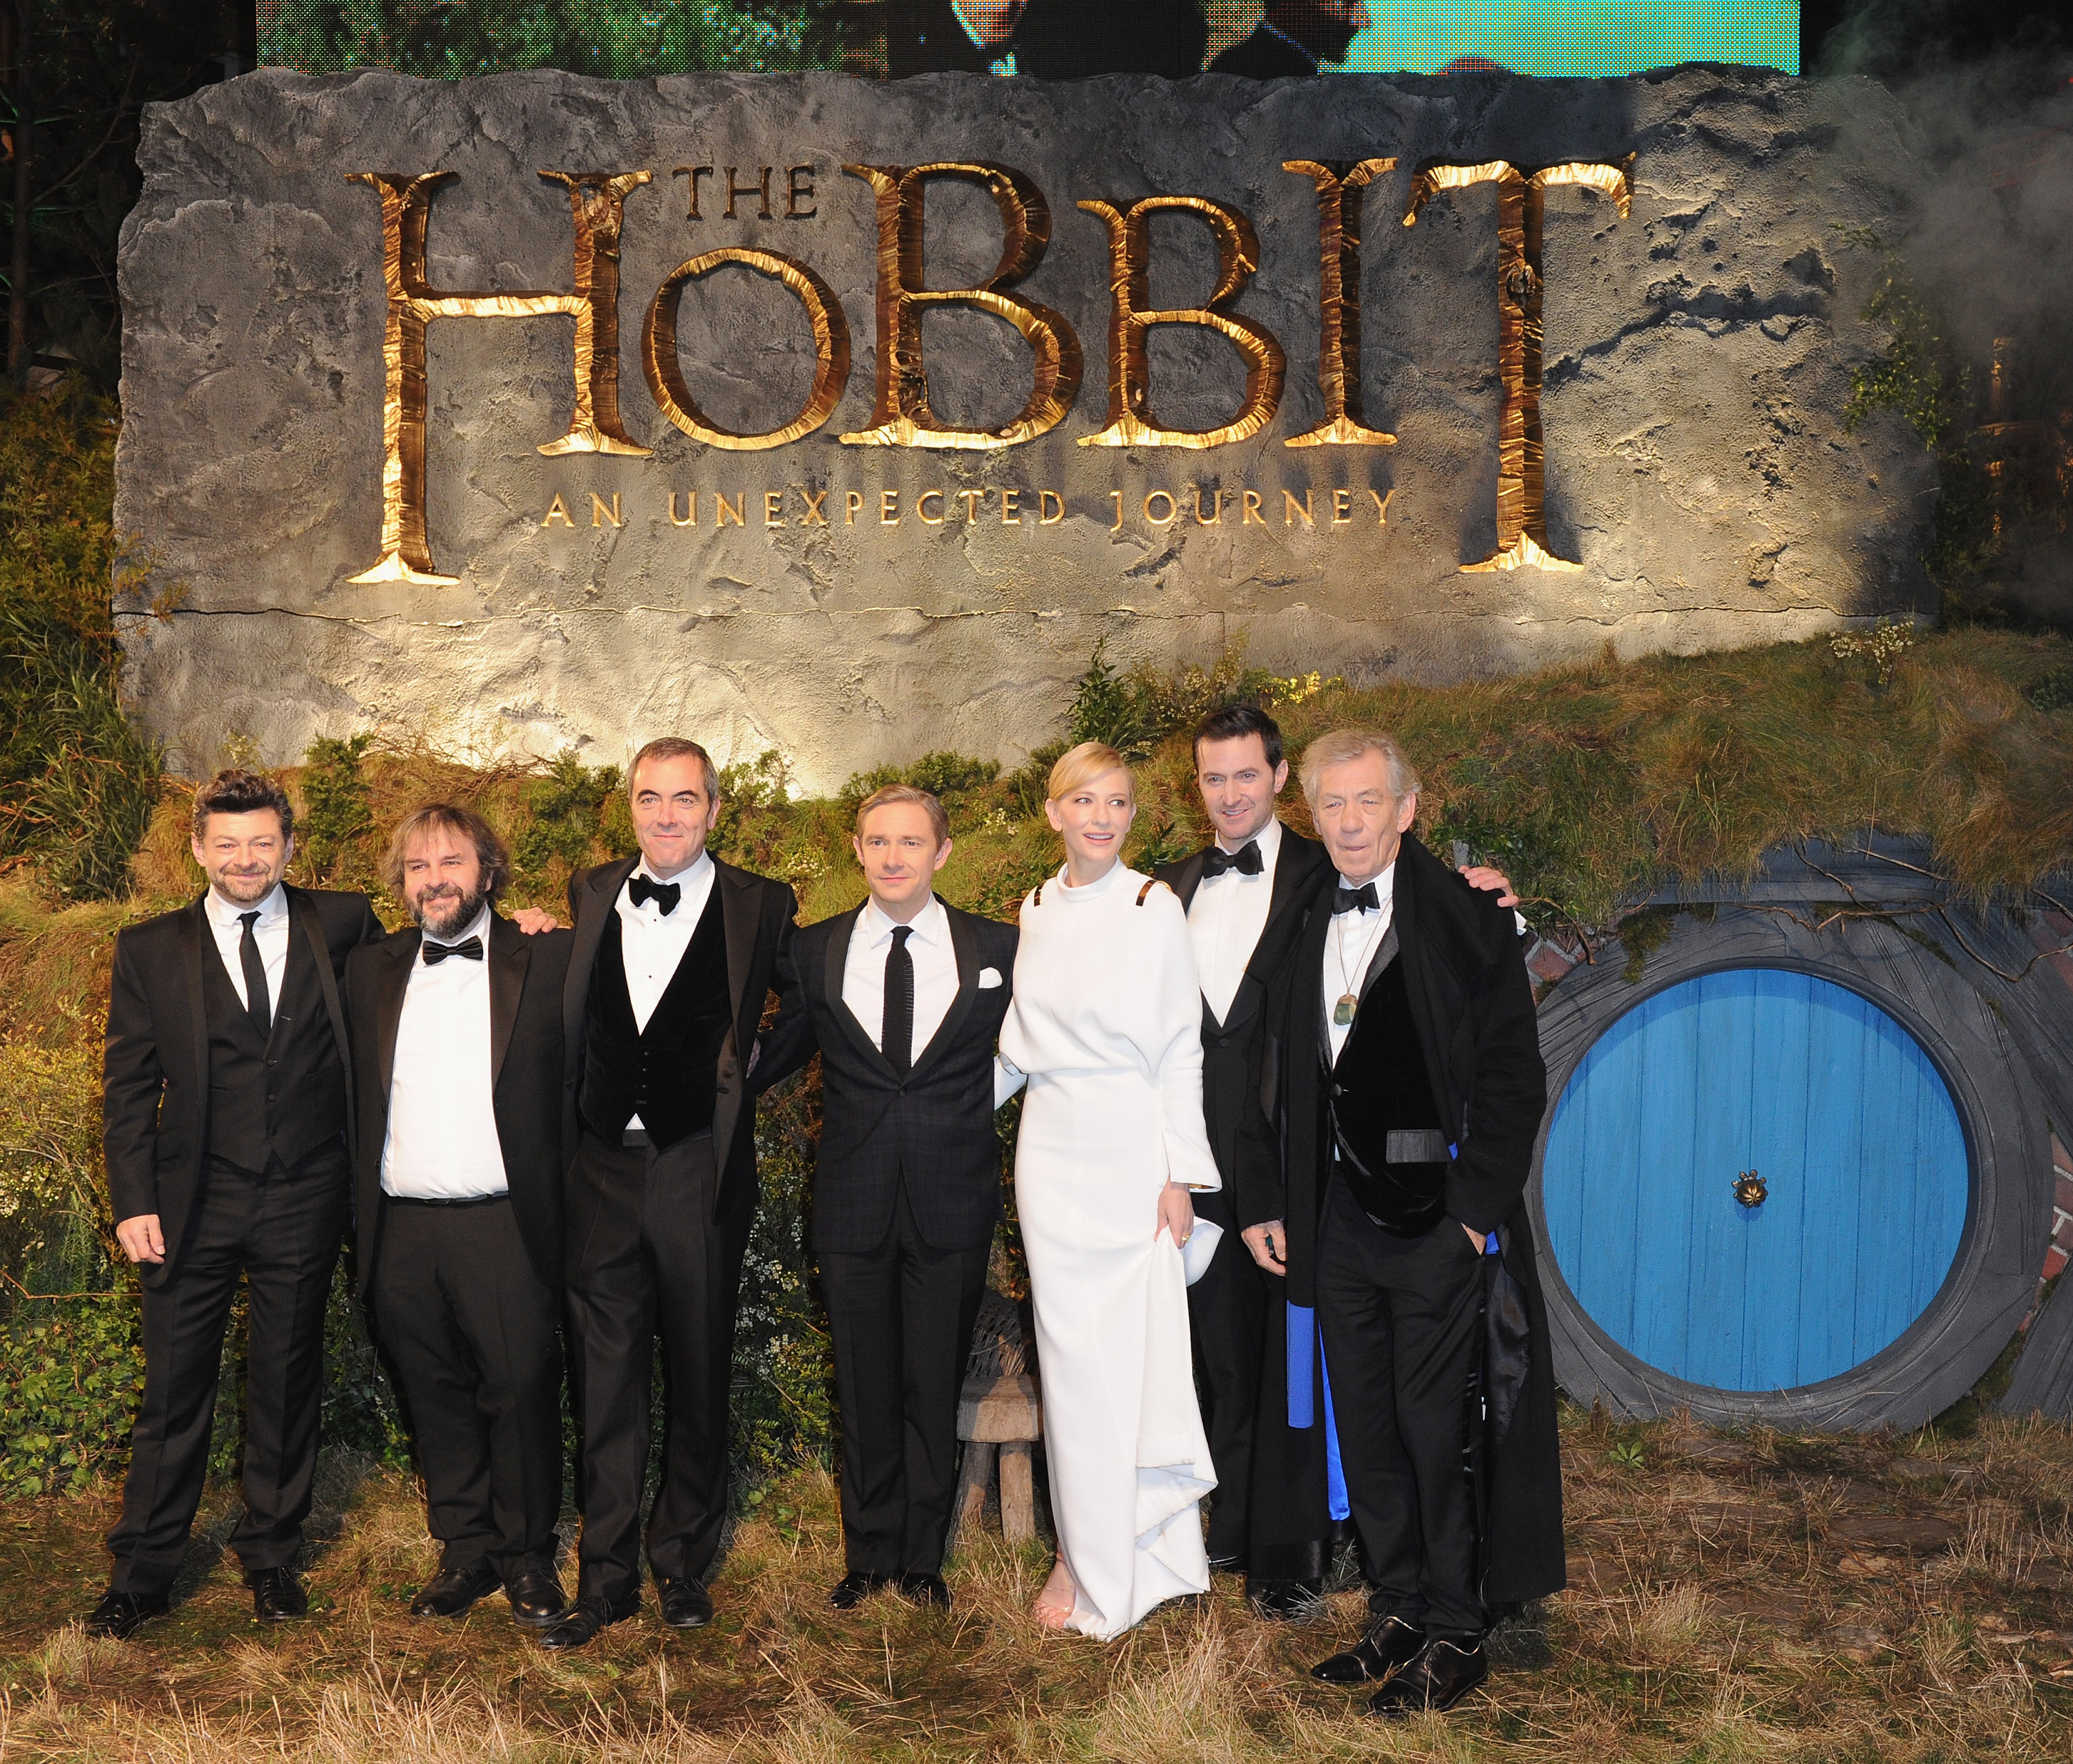 the hobbit an unexpected journey cast where to watch